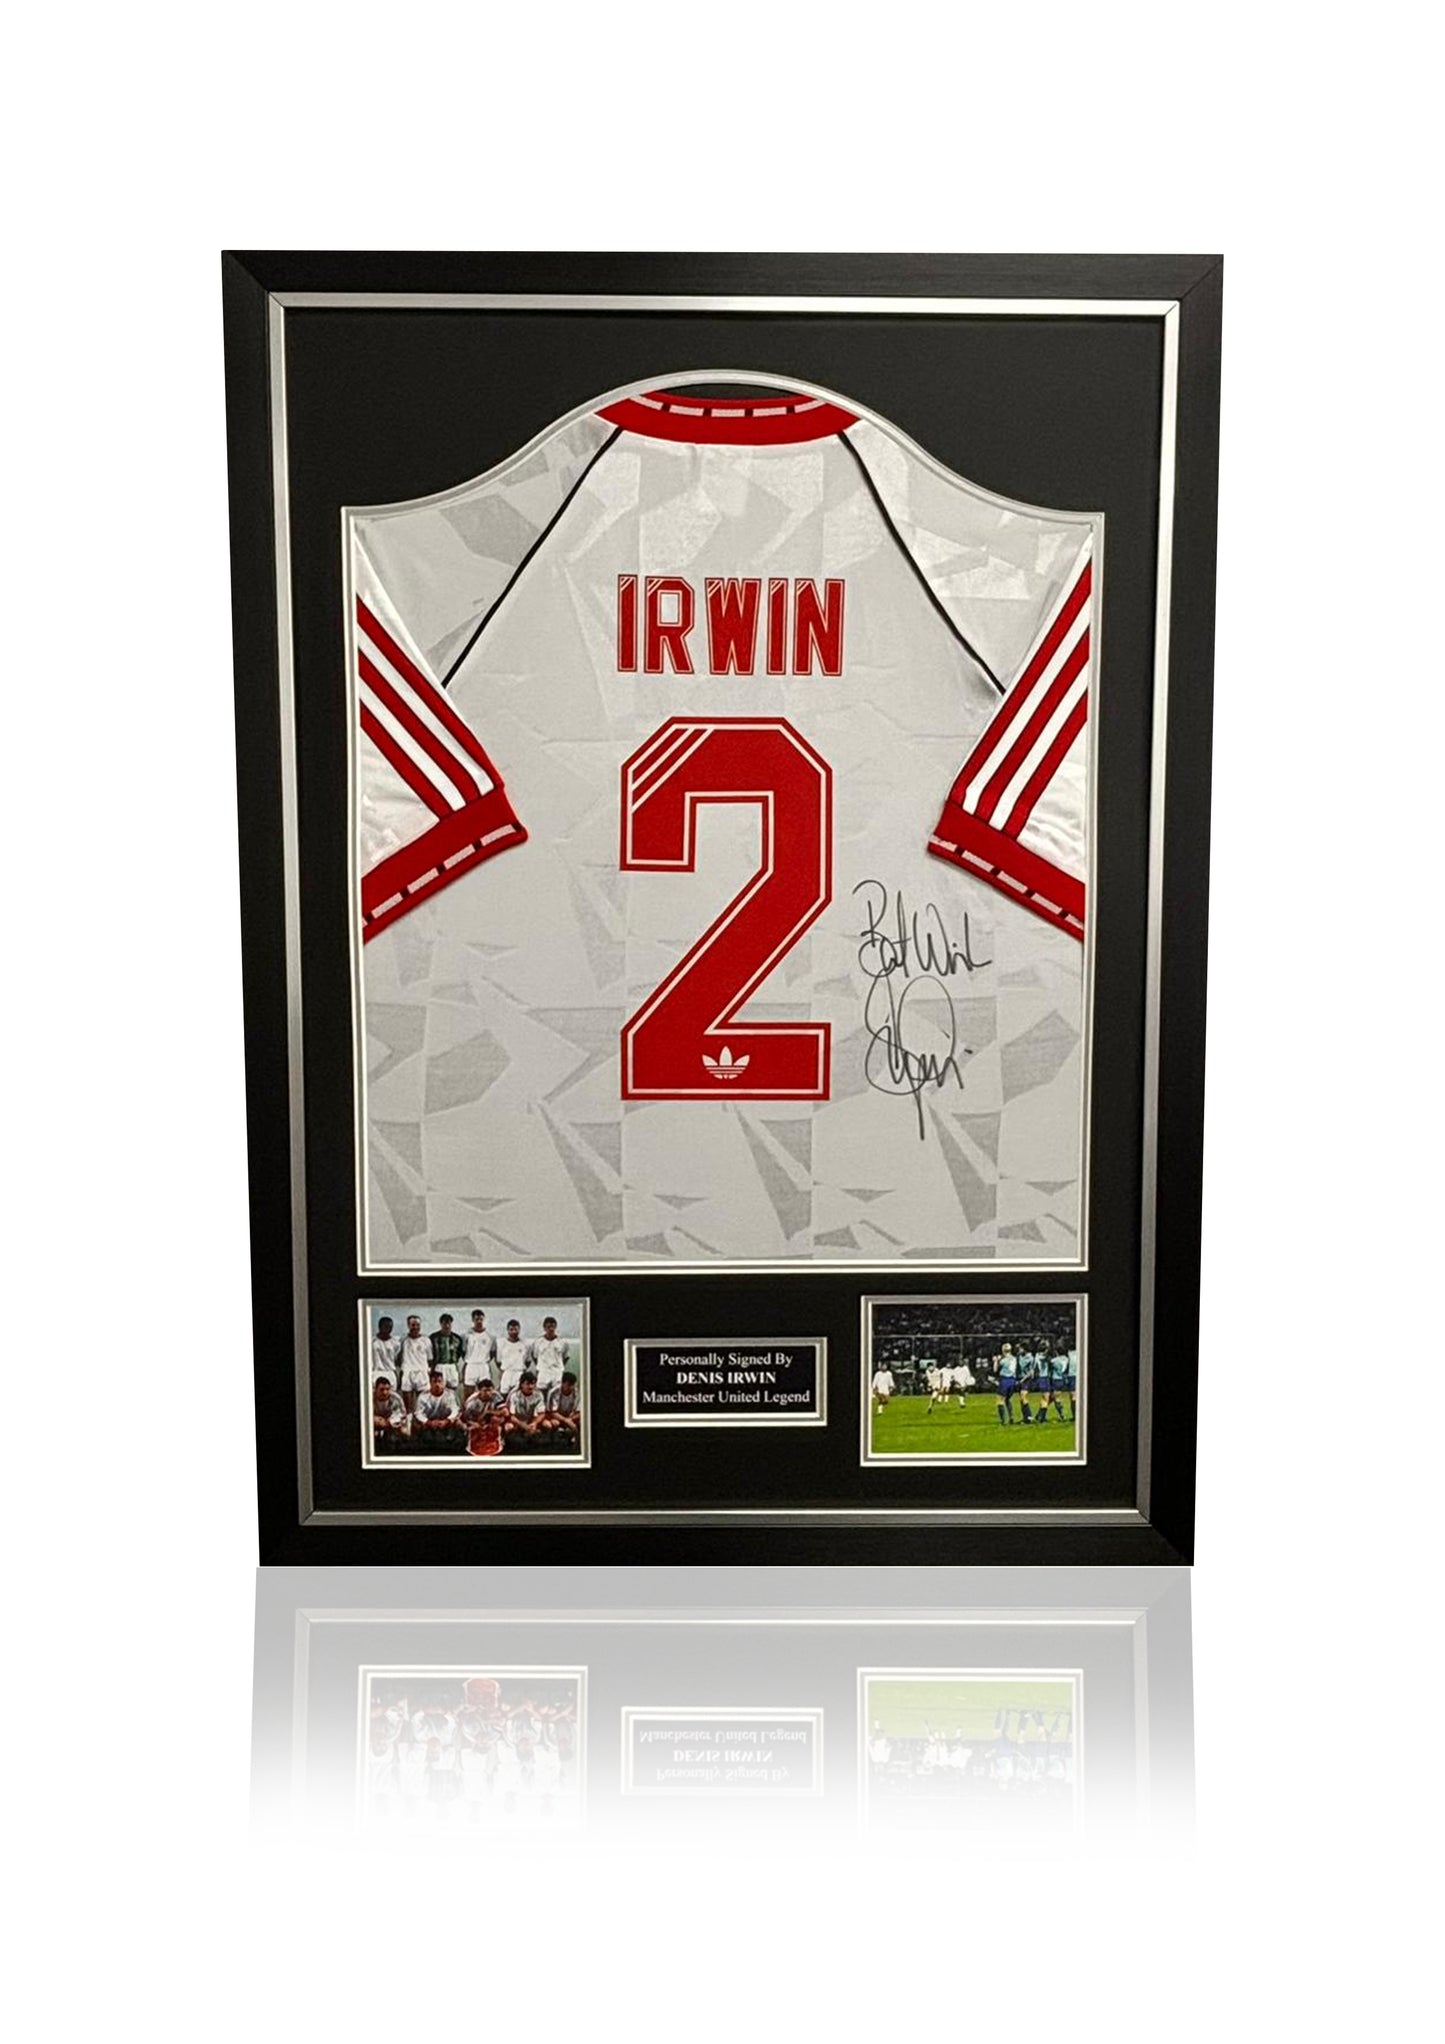 Denis Irwin Manchester United 1991 hand signed framed CWC Cup Winners Cup sleeves on show away shirt